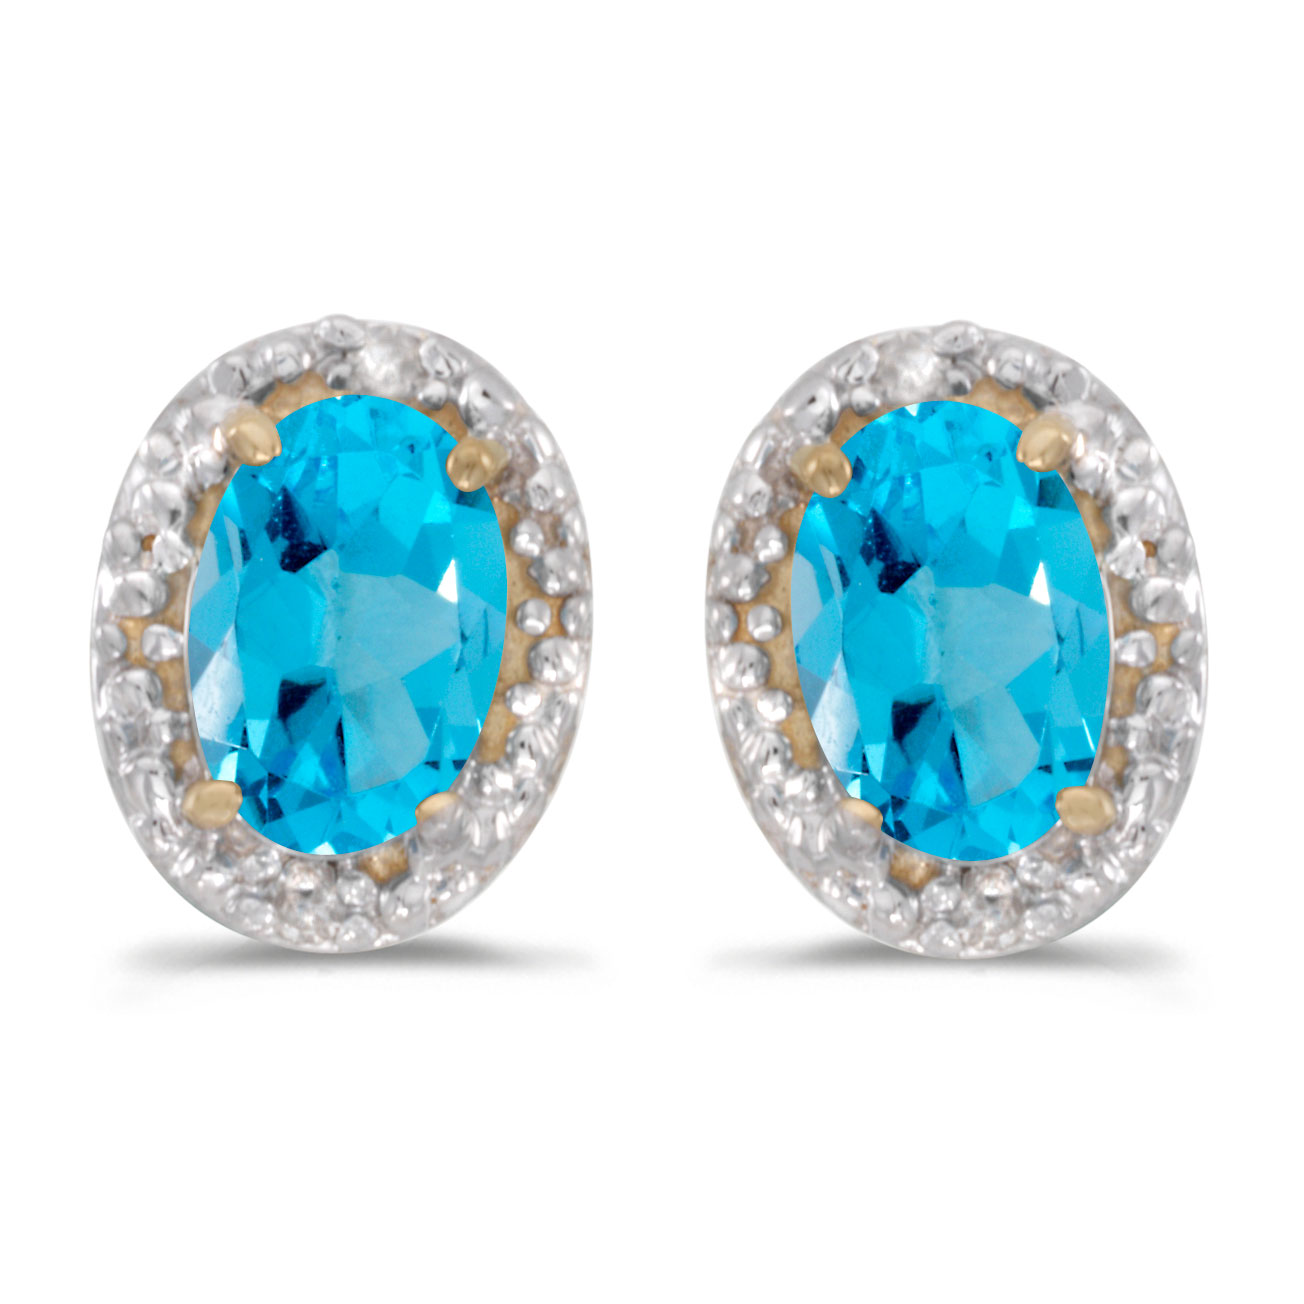 14k Yellow Gold Oval Blue Topaz And Diamond Earrings - image 1 of 4